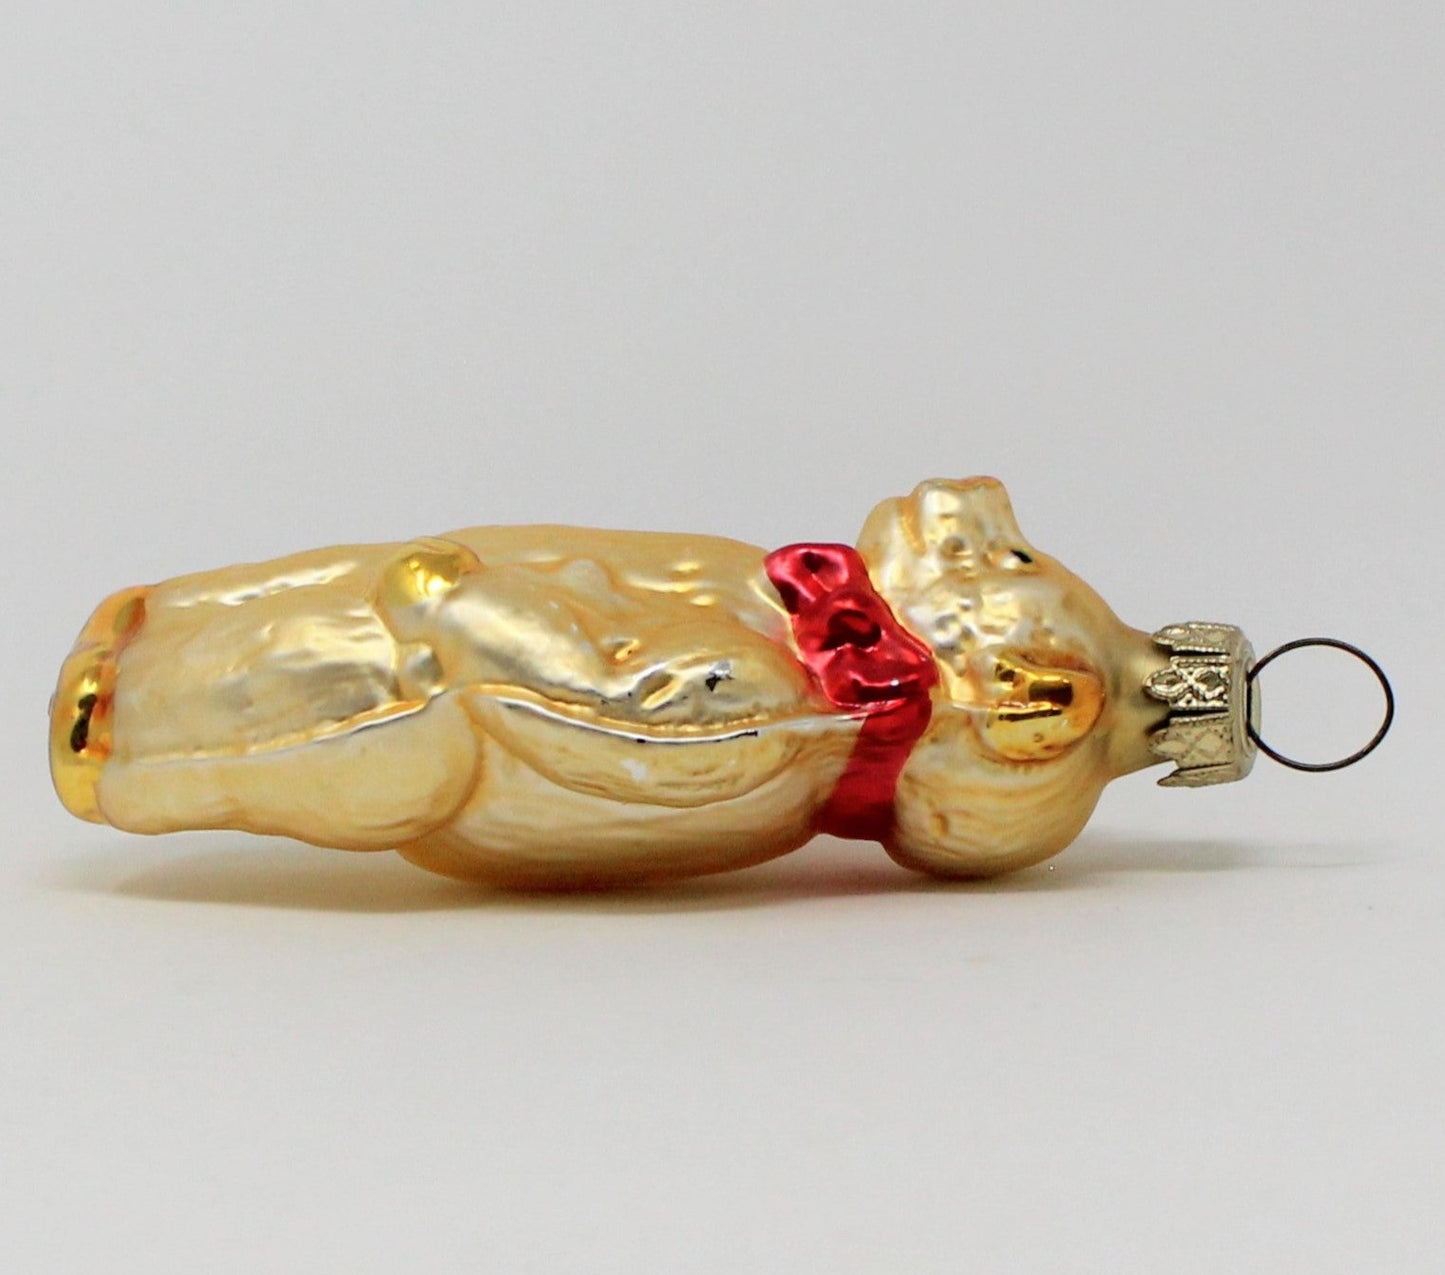 Ornament, Whitehurst, Figural Bear with Red Bow, Vintage Germany